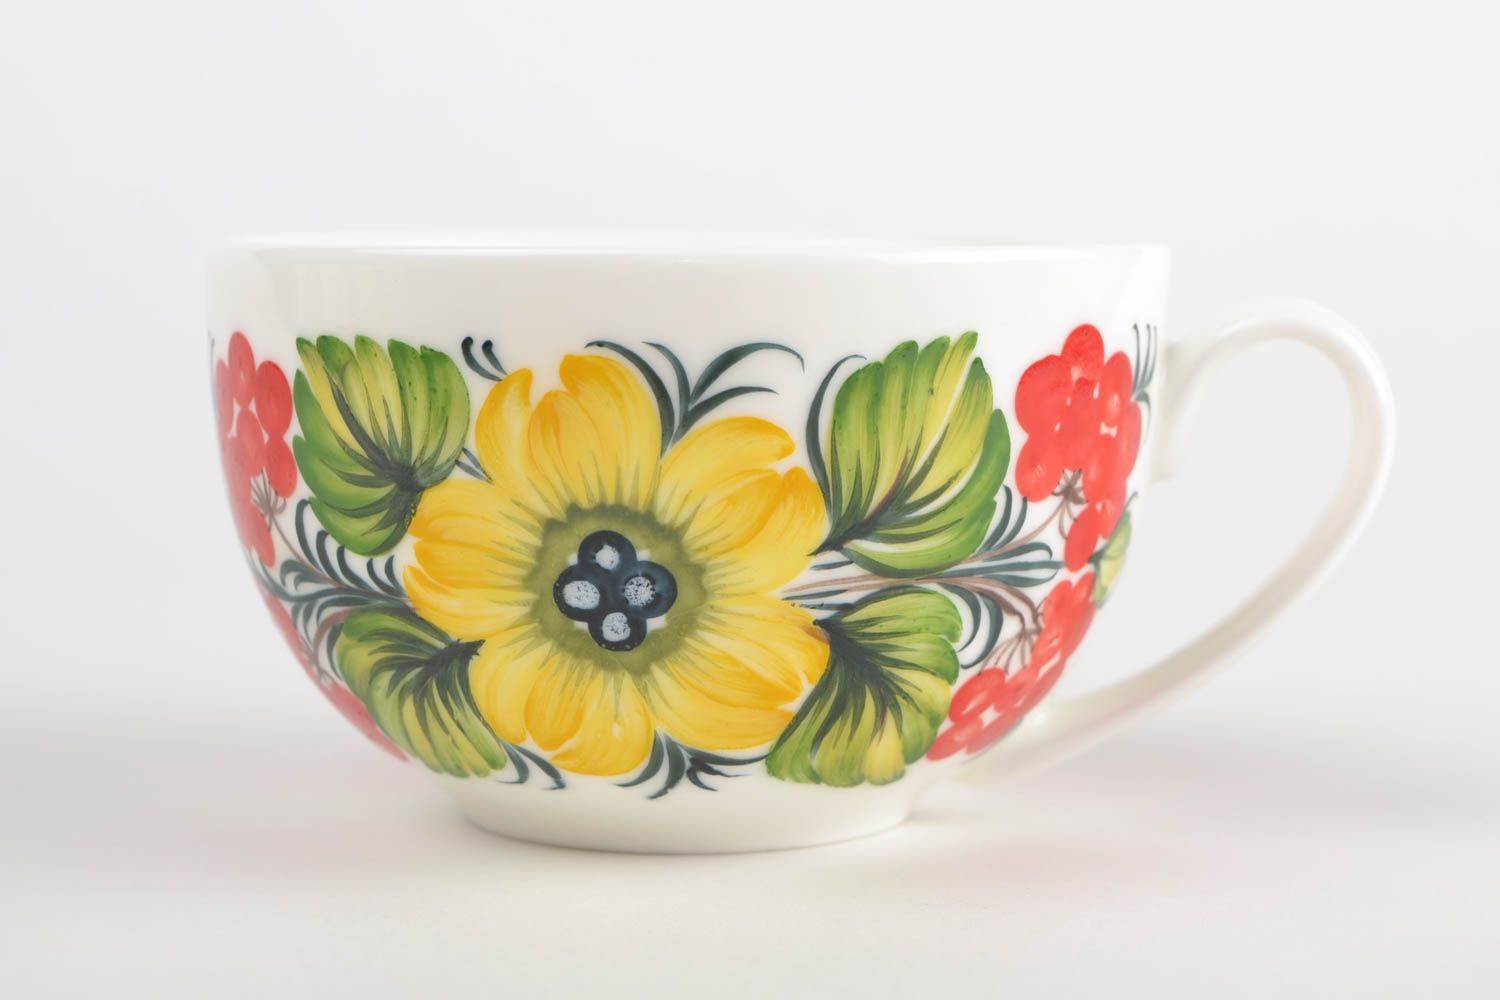 8,5 oz ceramic porcelain teacup with handle and floral design in Russian style 0,39 lb photo 3